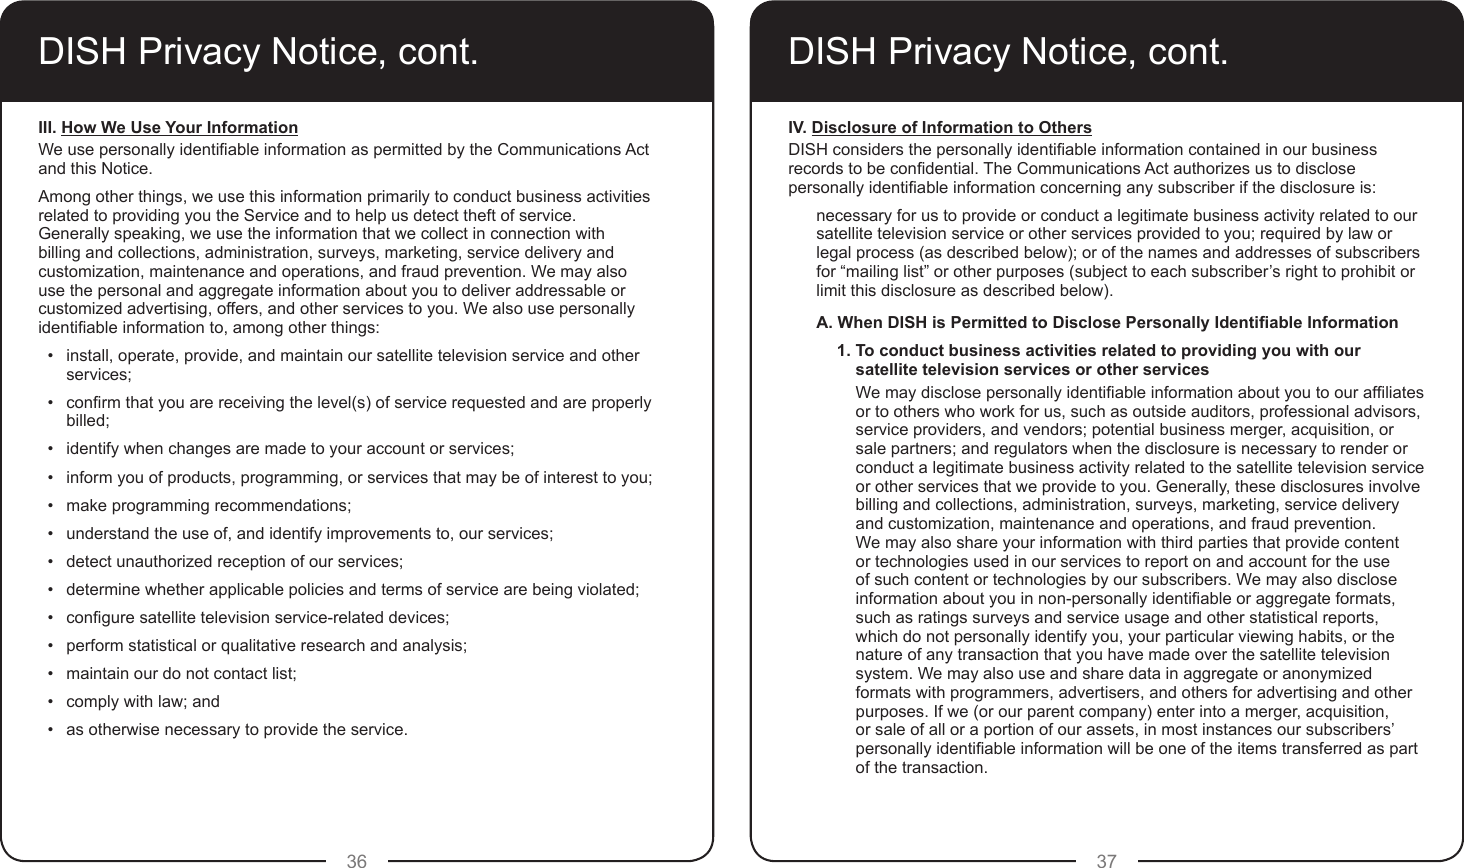 36 37DISH Privacy Notice, cont.III. How We Use Your InformationWe use personally identiable information as permitted by the Communications Act and this Notice.Among other things, we use this information primarily to conduct business activities related to providing you the Service and to help us detect theft of service.  Generally speaking, we use the information that we collect in connection with billing and collections, administration, surveys, marketing, service delivery and customization, maintenance and operations, and fraud prevention. We may also use the personal and aggregate information about you to deliver addressable or customized advertising, offers, and other services to you. We also use personally identiable information to, among other things:•  install, operate, provide, and maintain our satellite television service and other services;•  conrm that you are receiving the level(s) of service requested and are properly billed;•  identify when changes are made to your account or services;•  inform you of products, programming, or services that may be of interest to you;•  make programming recommendations;•  understand the use of, and identify improvements to, our services;•  detect unauthorized reception of our services;•  determine whether applicable policies and terms of service are being violated;•  congure satellite television service-related devices;•  perform statistical or qualitative research and analysis;•  maintain our do not contact list;•  comply with law; and•  as otherwise necessary to provide the service.DISH Privacy Notice, cont.IV. Disclosure of Information to OthersDISH considers the personally identiable information contained in our business records to be condential. The Communications Act authorizes us to disclose personally identiable information concerning any subscriber if the disclosure is:necessary for us to provide or conduct a legitimate business activity related to our satellite television service or other services provided to you; required by law or legal process (as described below); or of the names and addresses of subscribers for “mailing list” or other purposes (subject to each subscriber’s right to prohibit or limit this disclosure as described below).A. When DISH is Permitted to Disclose Personally Identiable Information1. To conduct business activities related to providing you with our satellite television services or other services We may disclose personally identiable information about you to our afliates or to others who work for us, such as outside auditors, professional advisors, service providers, and vendors; potential business merger, acquisition, or sale partners; and regulators when the disclosure is necessary to render or conduct a legitimate business activity related to the satellite television service or other services that we provide to you. Generally, these disclosures involve billing and collections, administration, surveys, marketing, service delivery and customization, maintenance and operations, and fraud prevention. We may also share your information with third parties that provide content or technologies used in our services to report on and account for the use of such content or technologies by our subscribers. We may also disclose information about you in non-personally identiable or aggregate formats, such as ratings surveys and service usage and other statistical reports, which do not personally identify you, your particular viewing habits, or the nature of any transaction that you have made over the satellite television system. We may also use and share data in aggregate or anonymized formats with programmers, advertisers, and others for advertising and other purposes. If we (or our parent company) enter into a merger, acquisition, or sale of all or a portion of our assets, in most instances our subscribers’ personally identiable information will be one of the items transferred as part of the transaction.